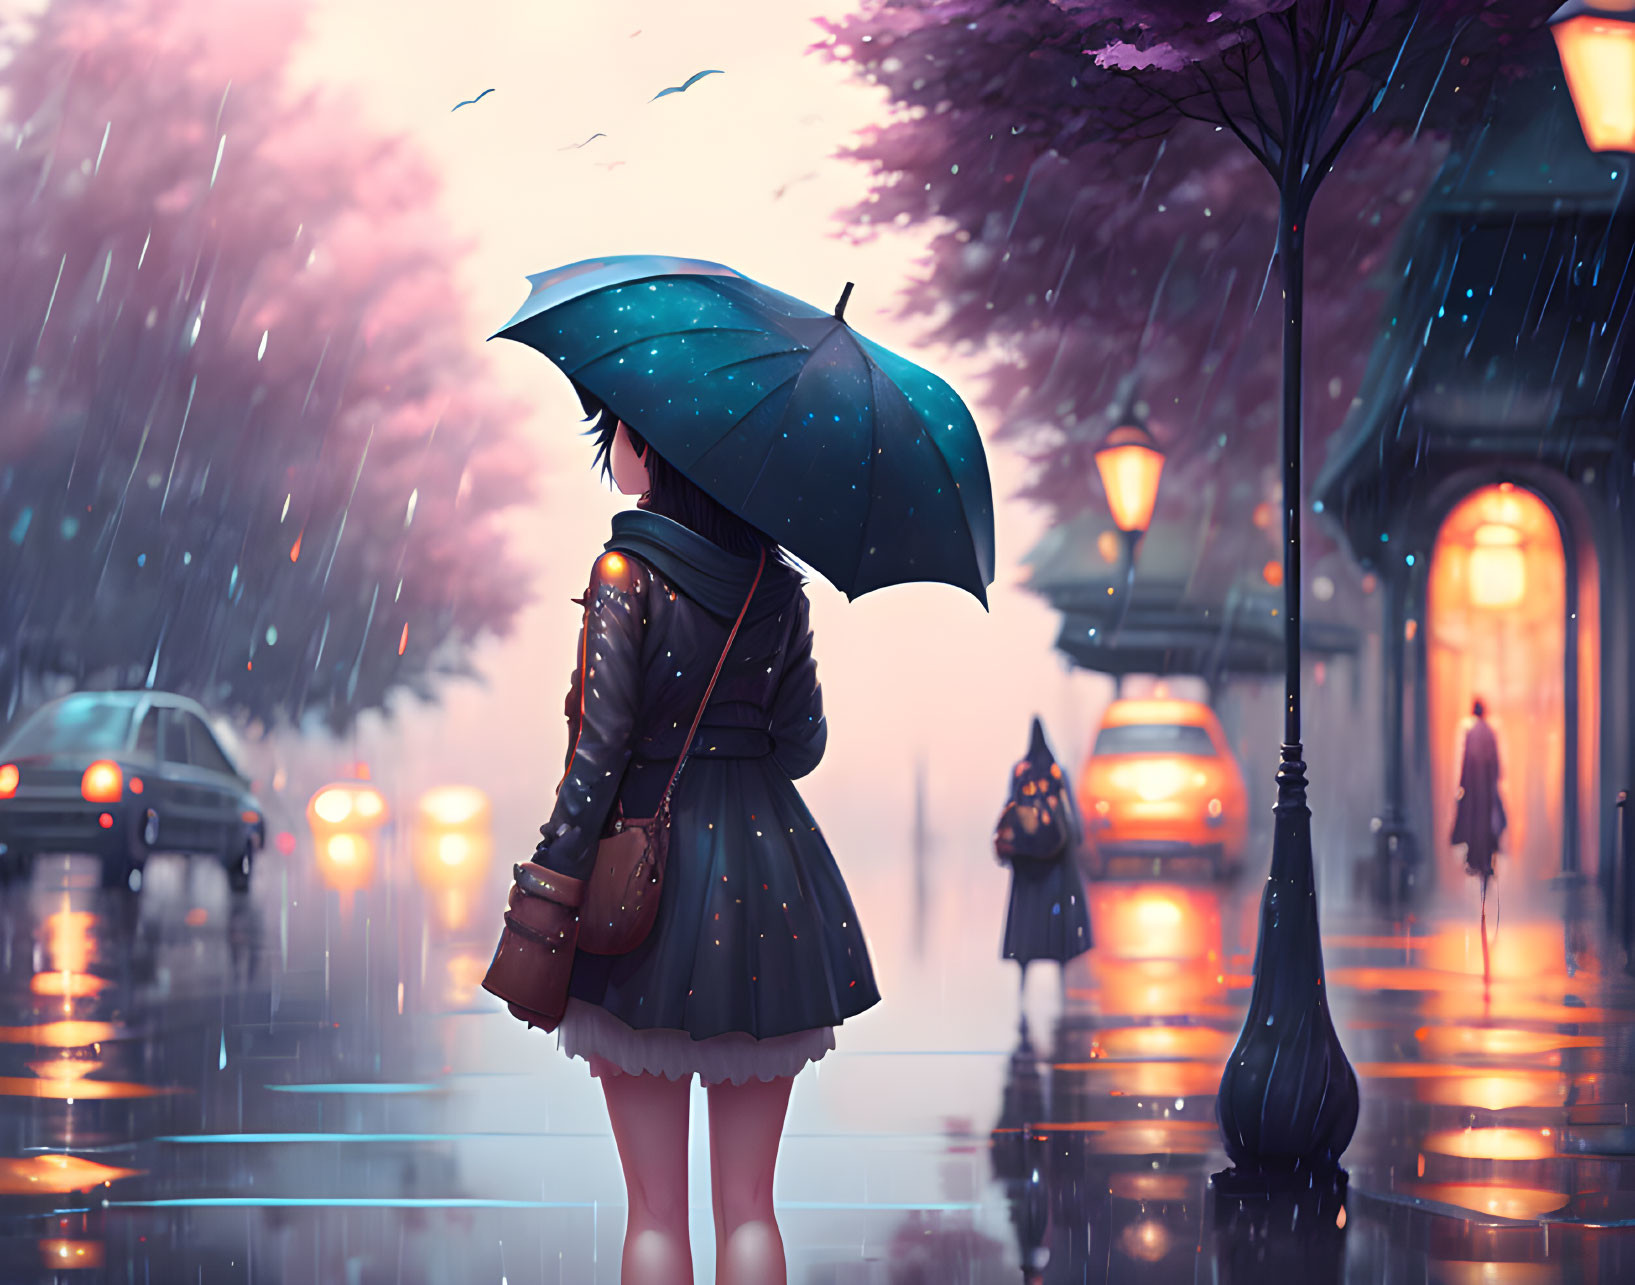 Lonely figure with blue polka dot umbrella in rainy city street with glowing lamps and cherry blossoms